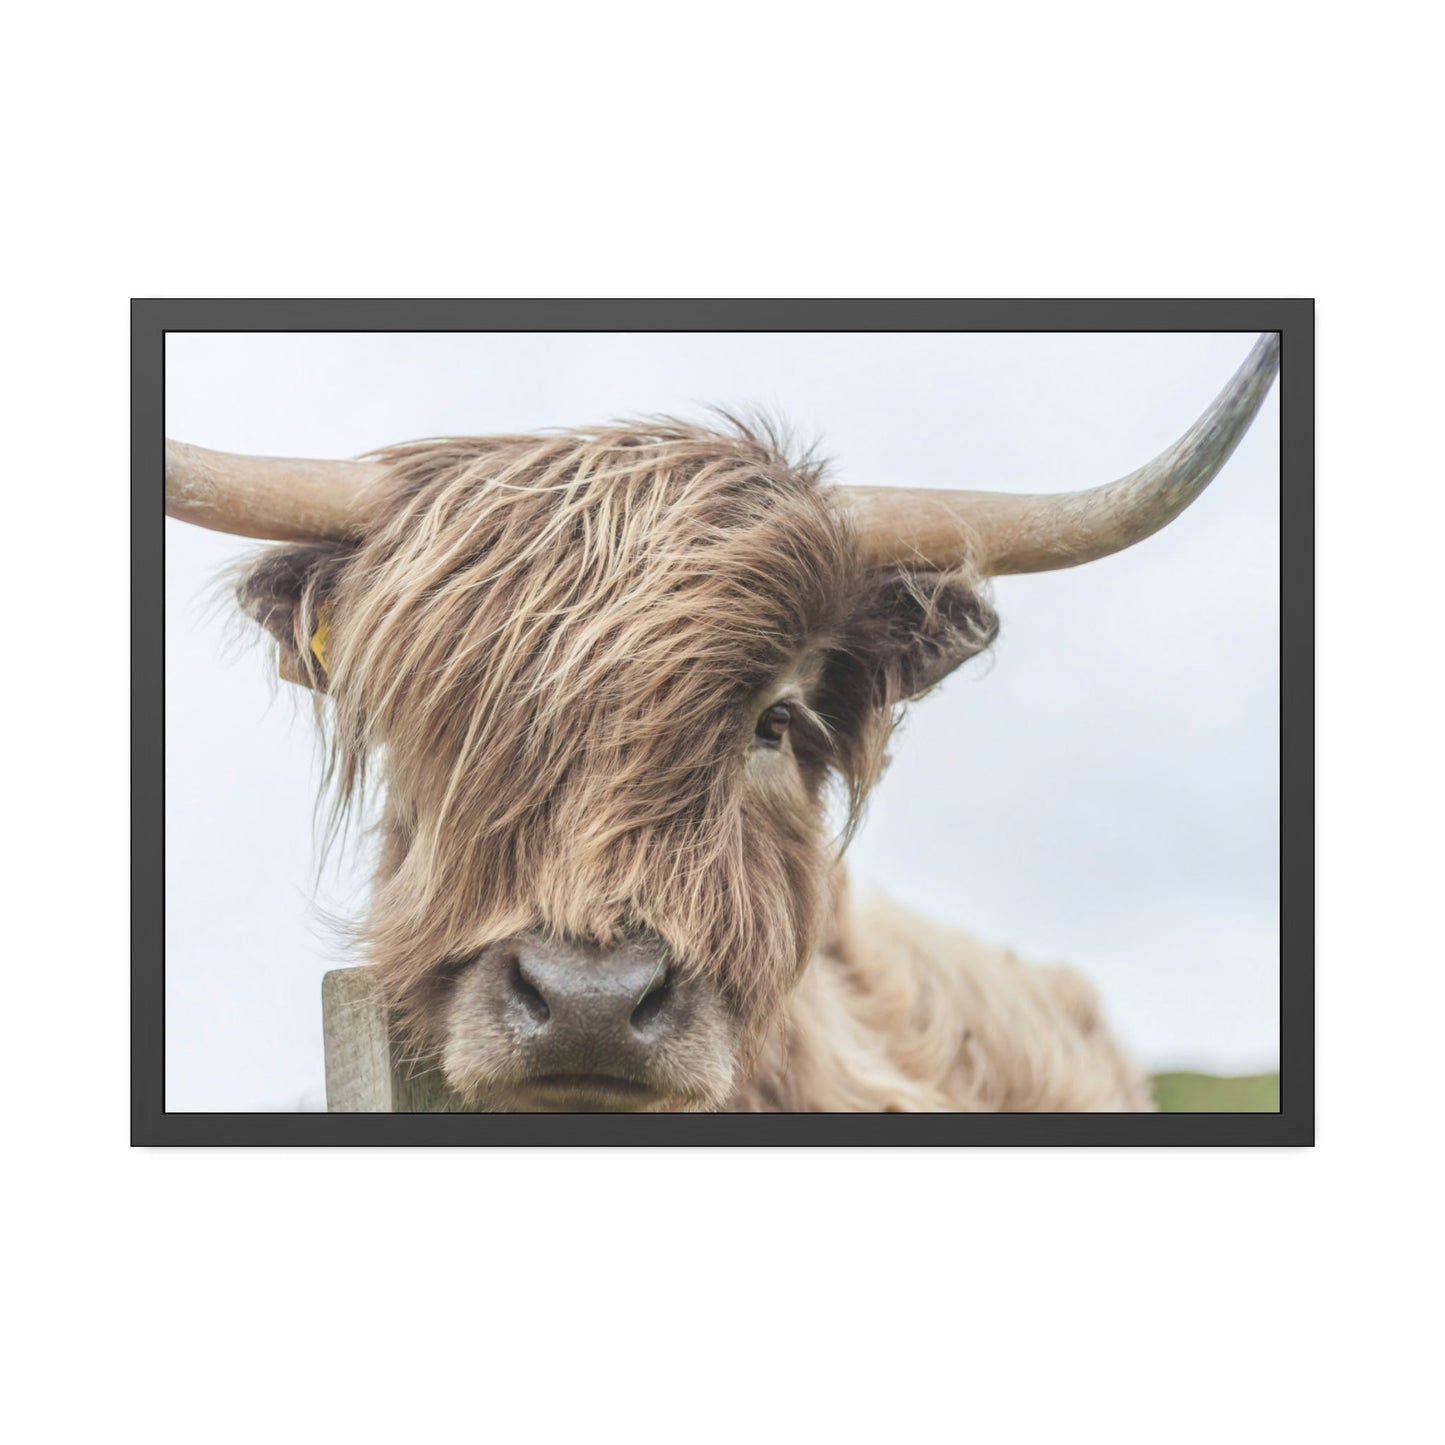 Wilderness Wonder: Wall Art on Canvas of a Majestic Highland Cow in the Wild